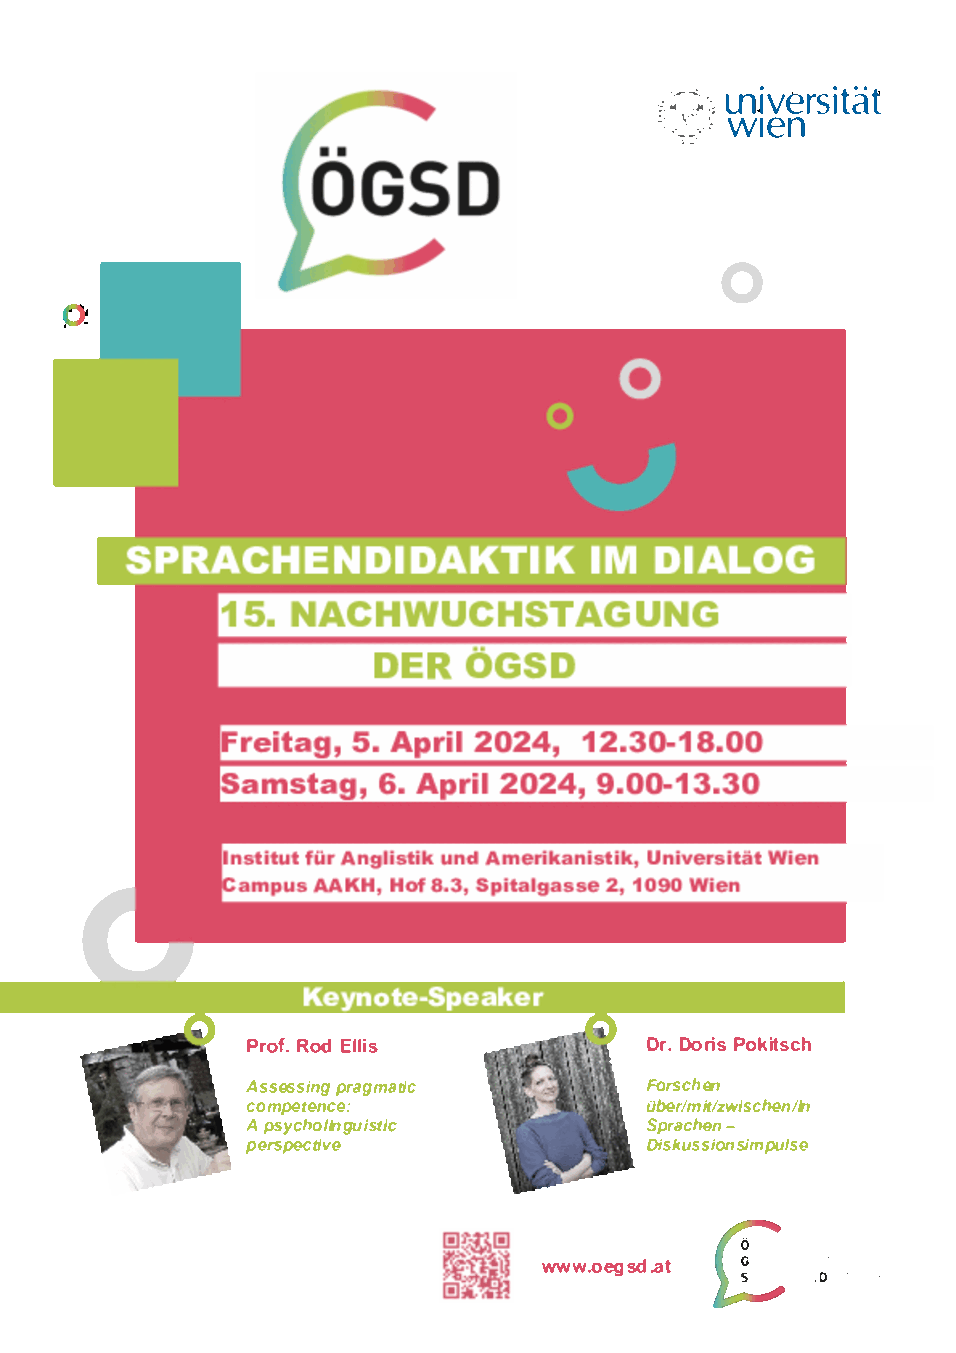 Flyer of ÖGSD Young Researchers' Conference detailing its date and location, and two photos of the keynote speakers Rod Ellis and Doris Pokitsch